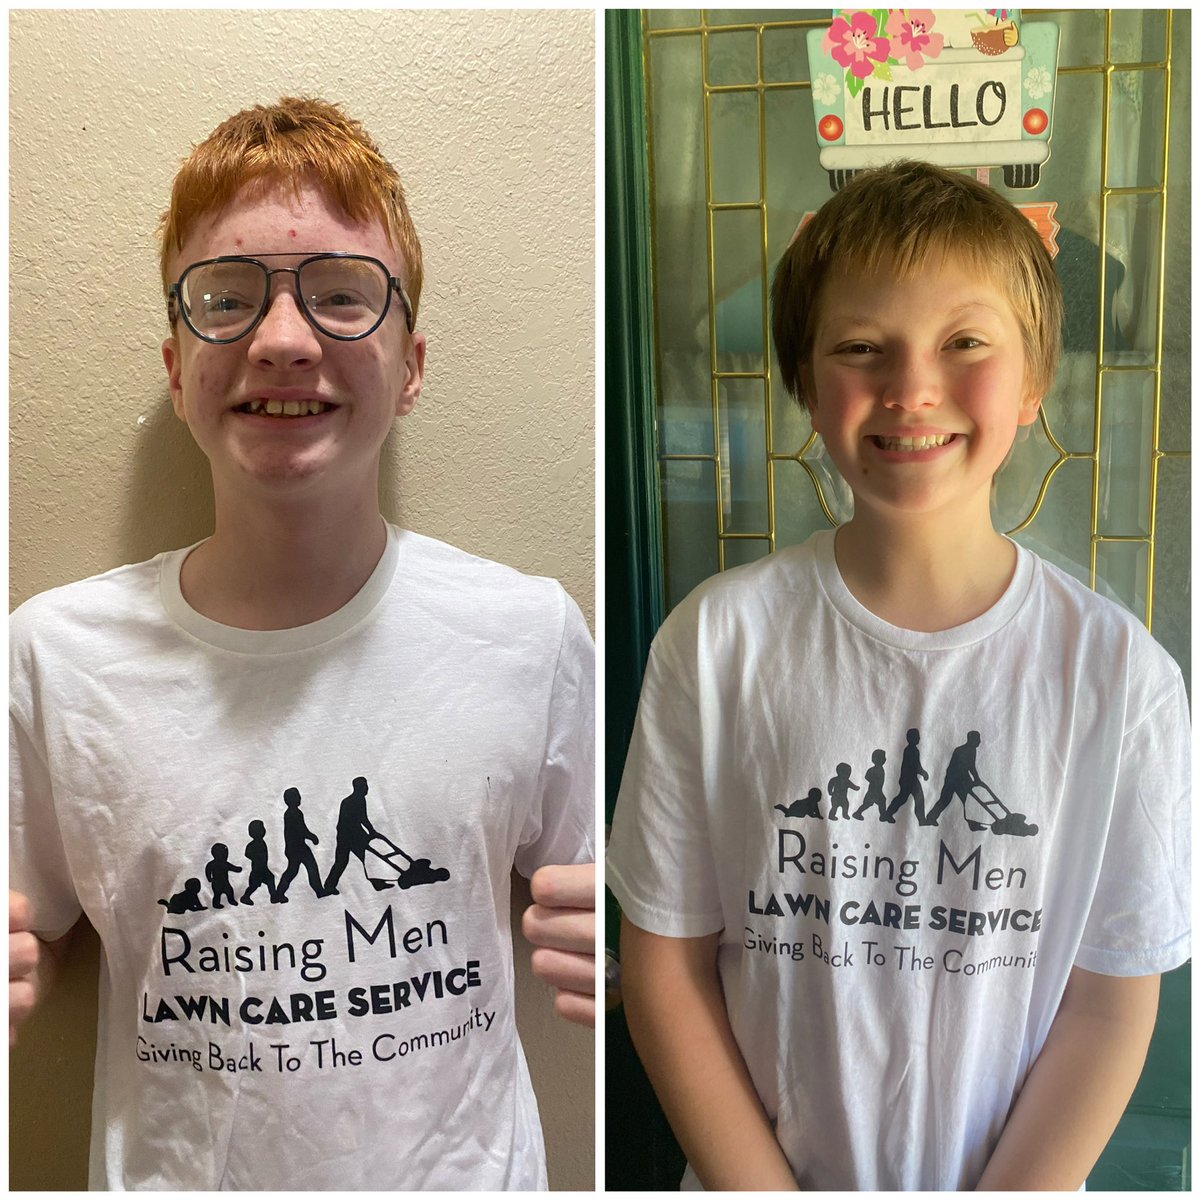 Harley & Drayden of Tuscumbia,AL who recently signed up for our 50-yard challenge received their starter pack in the mail which included their Raising Men shirts, safety glasses, and ear protection. They are now fully equipped and ready to take on the challenge ! Do you have any…